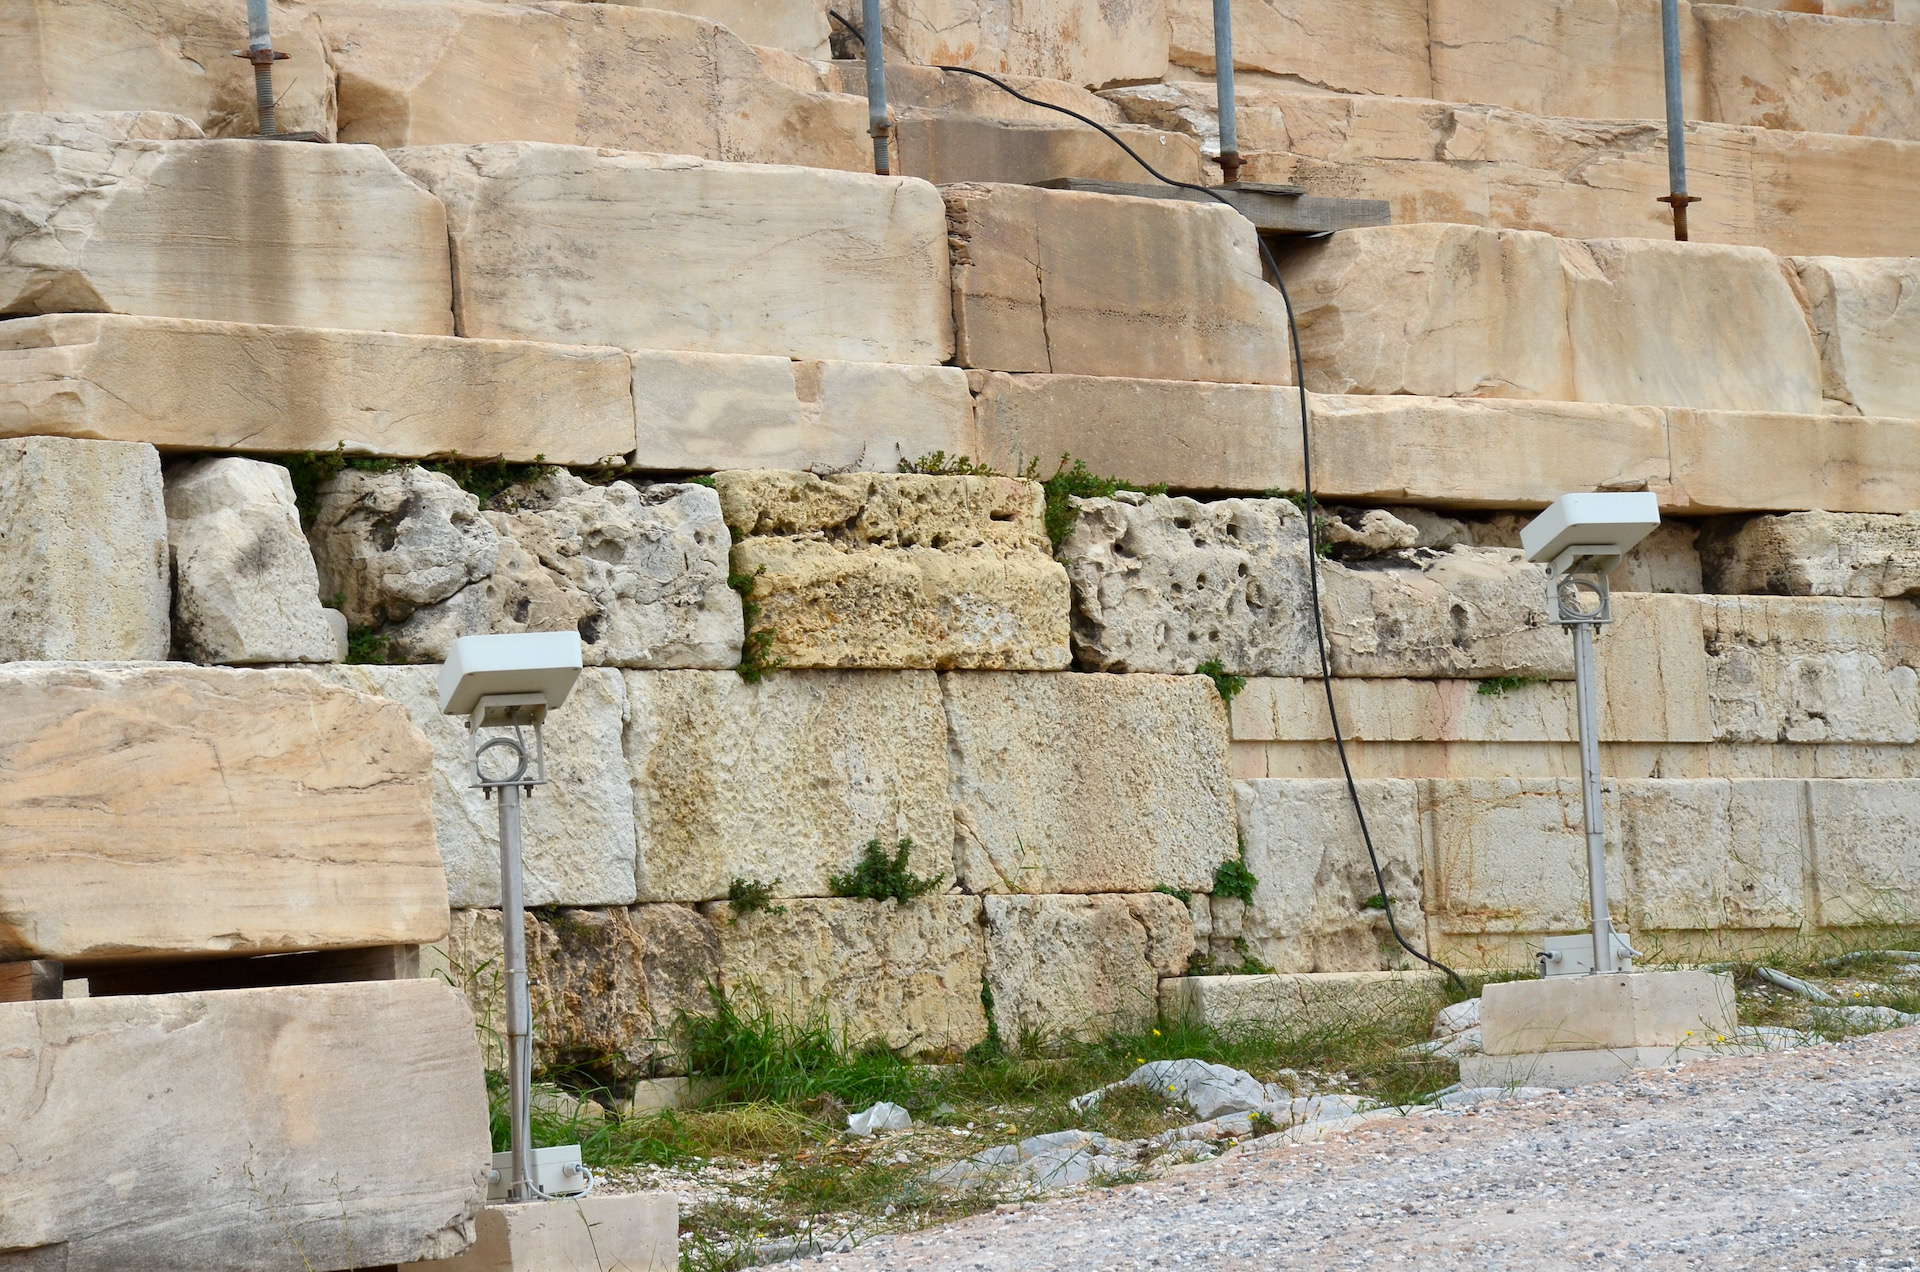 Foundations of the Old Parthenon on the Acropolis in Athens, Greece